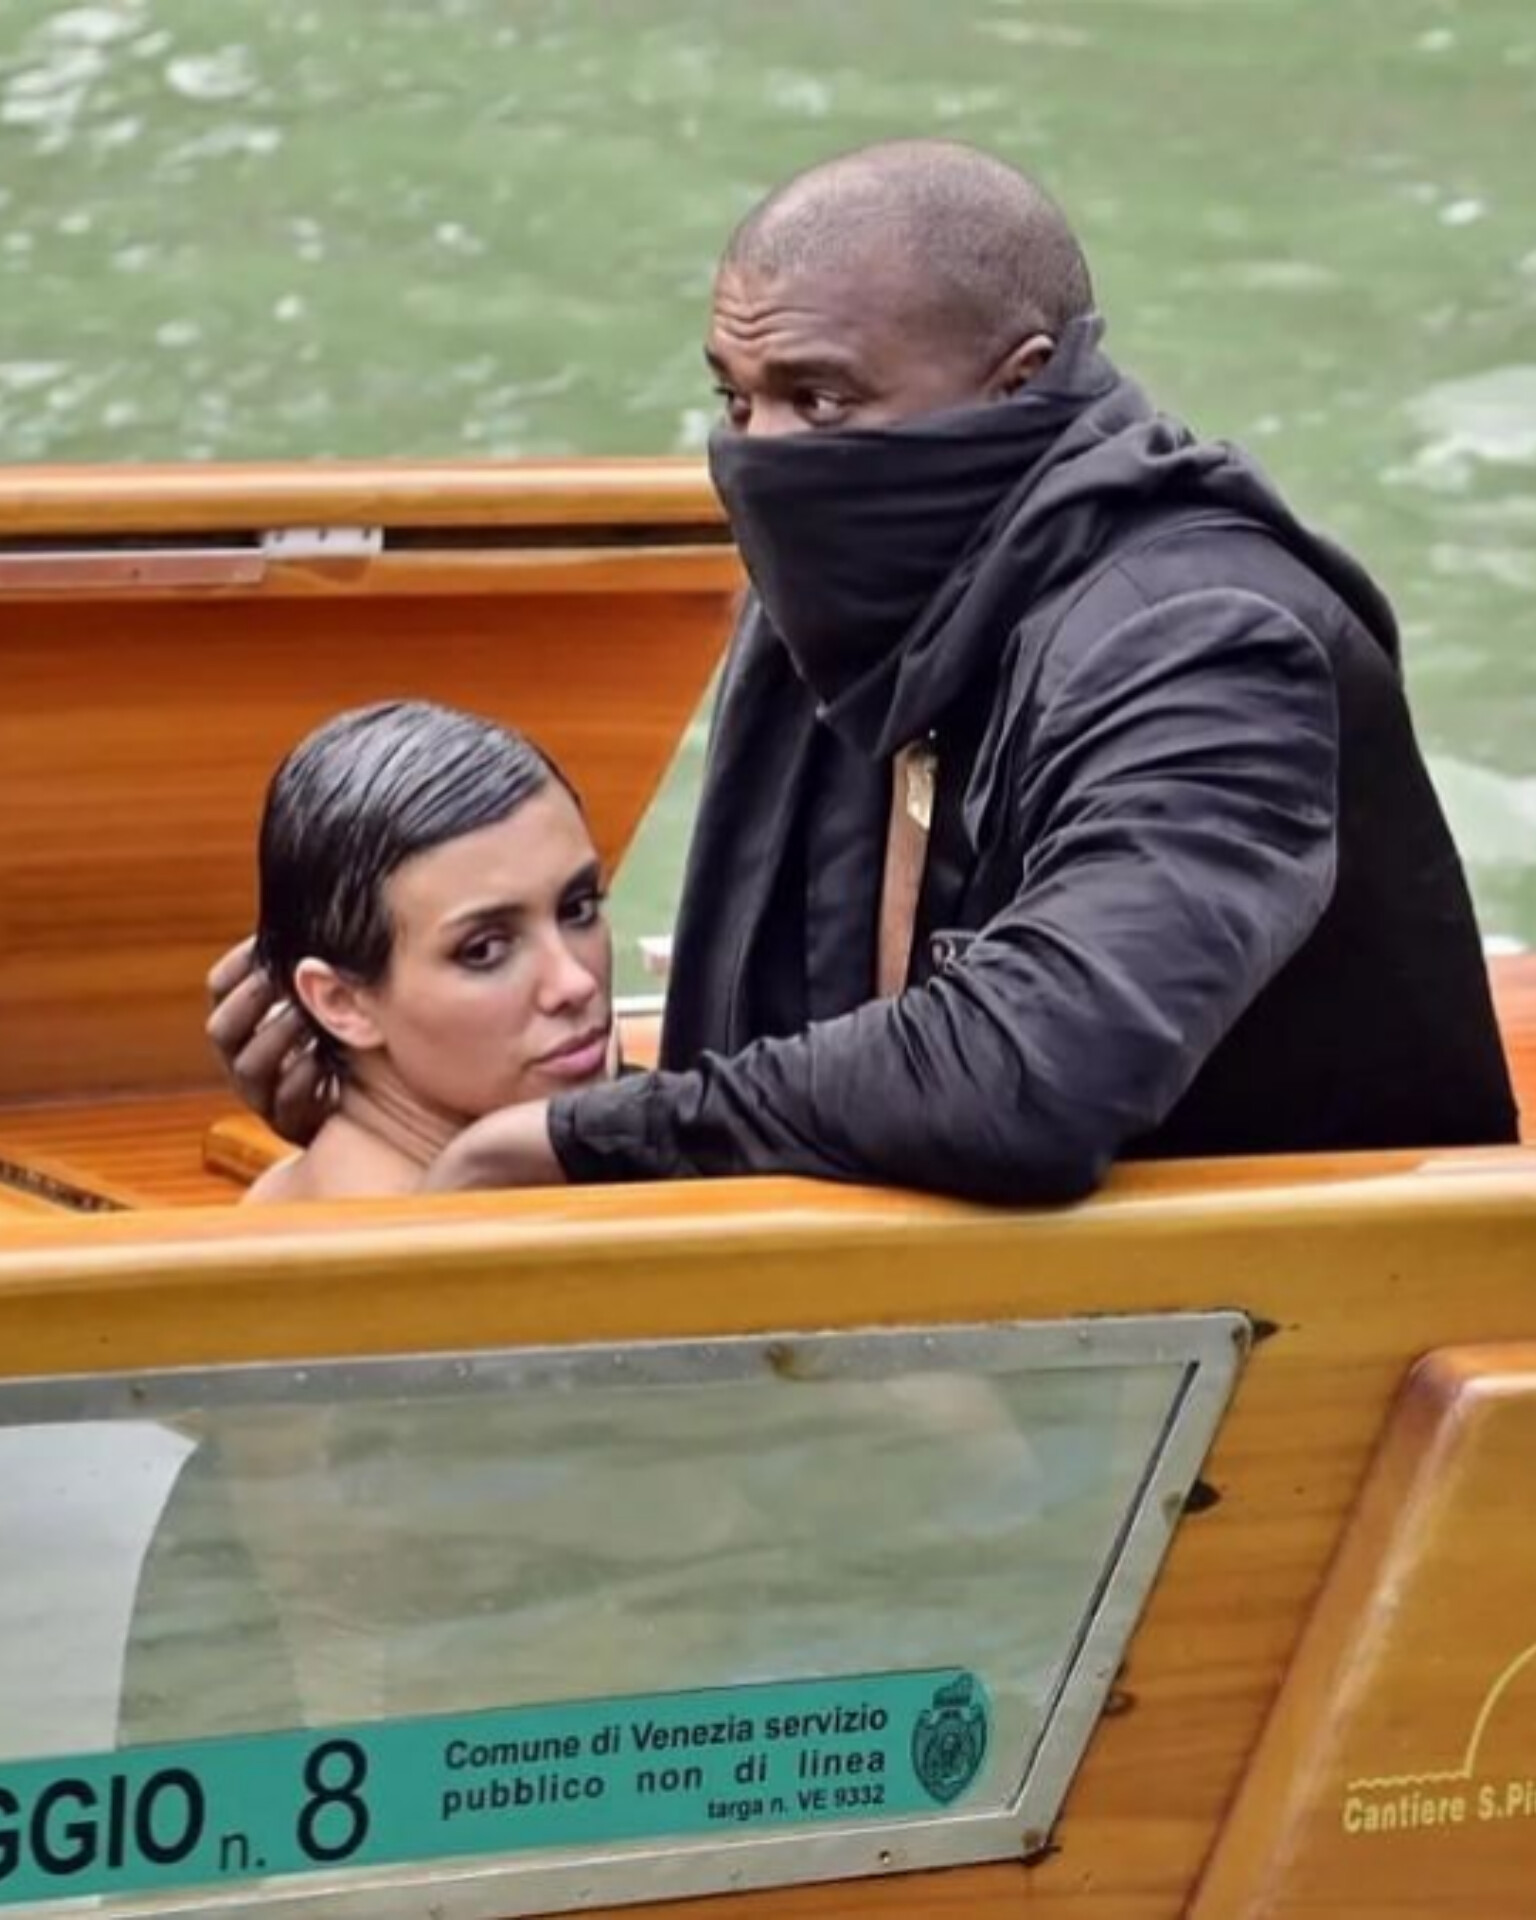 Kanye West get banned from Venice boat company